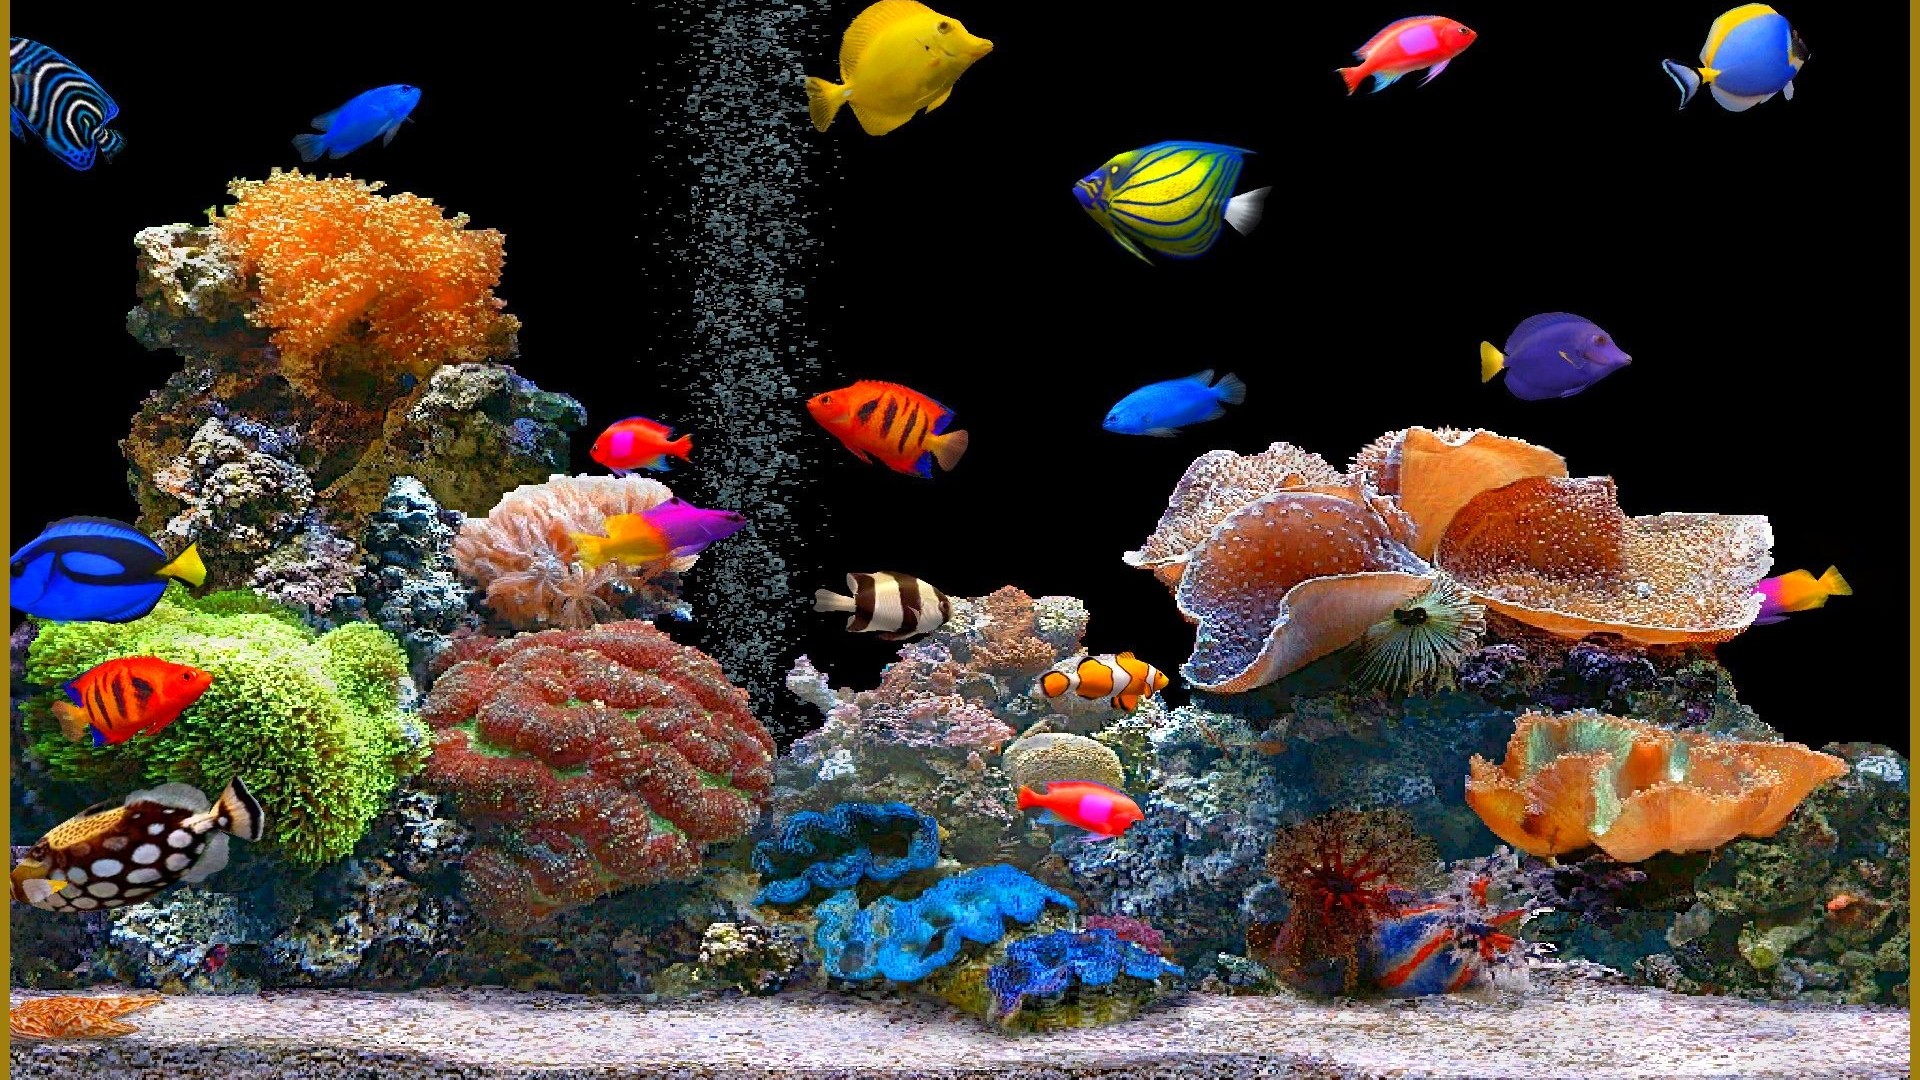 Free download and install Animated Fish Desktop Wallpaper there will 1920x1080